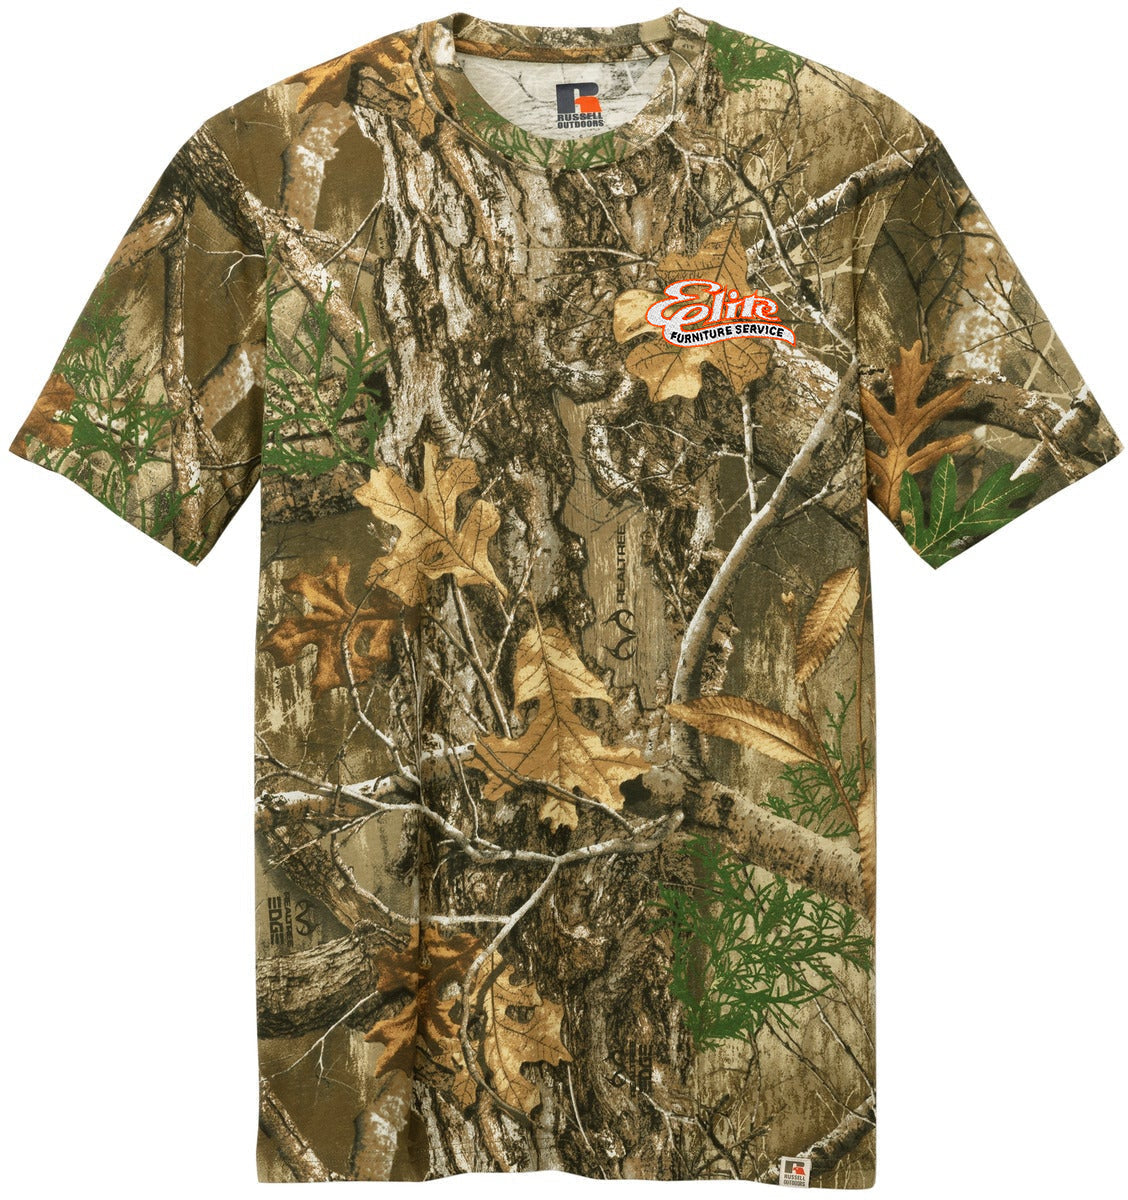 Russell Outdoors Realtree Tee, Product